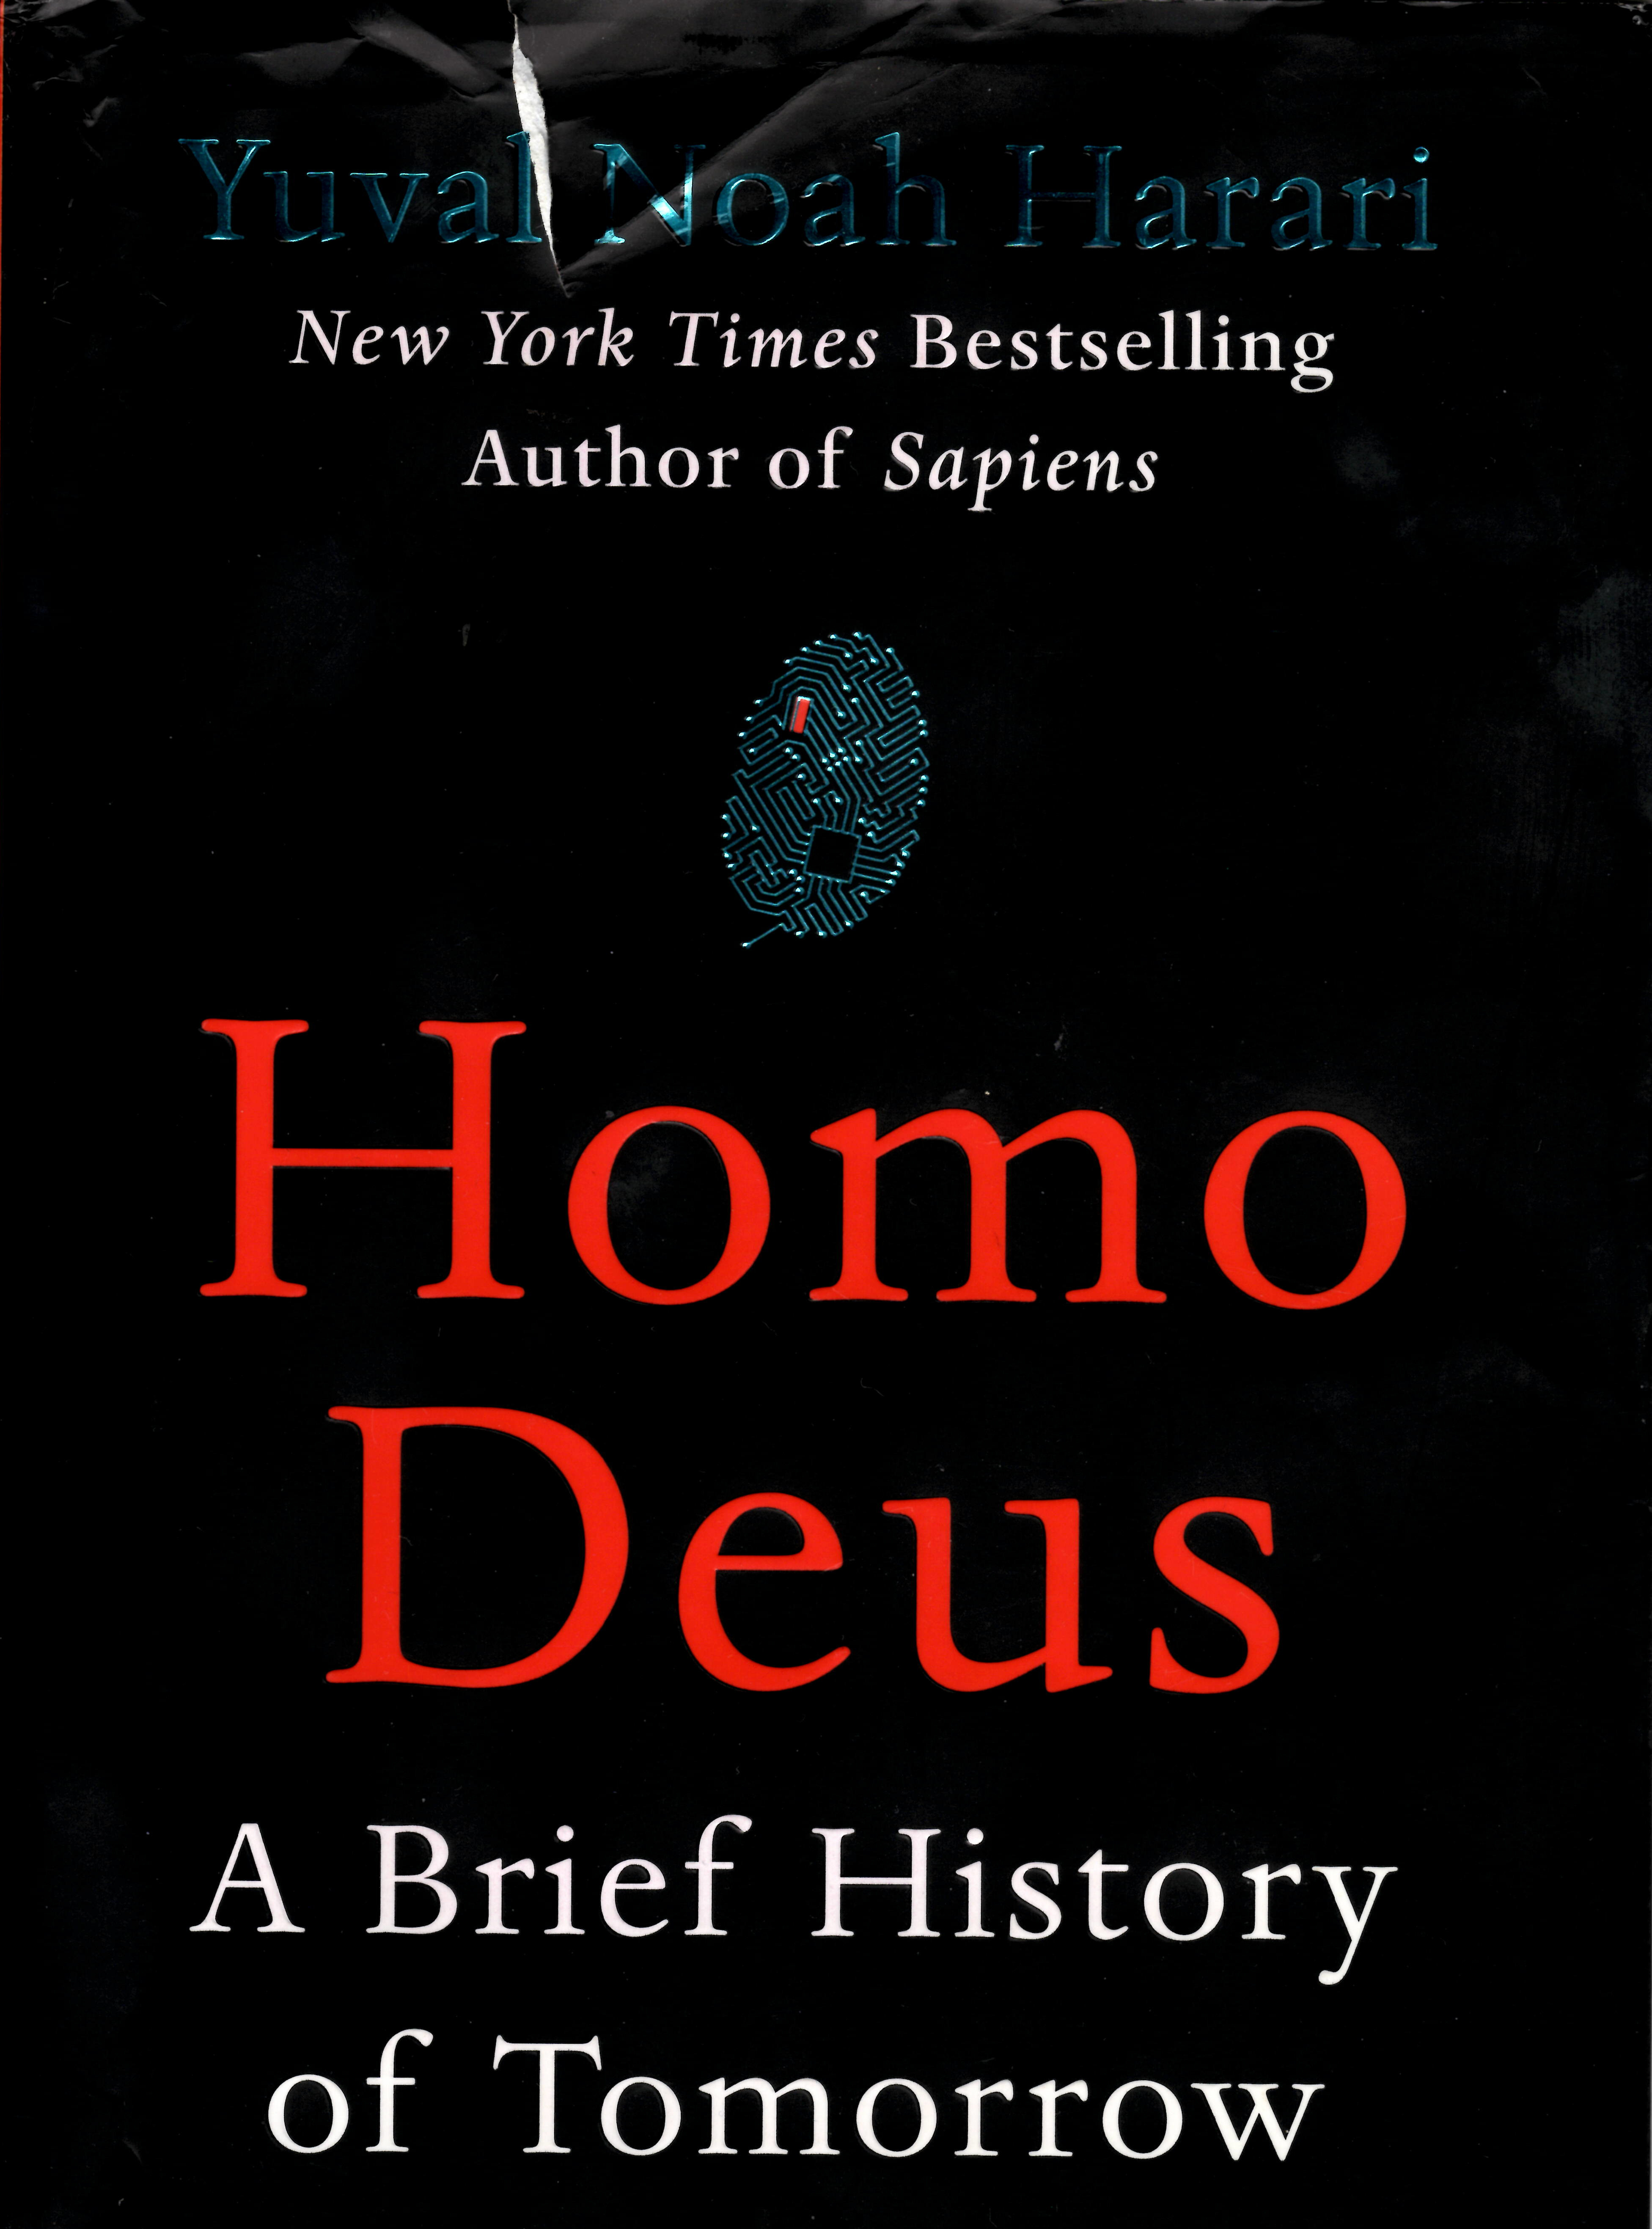 Four Thoughts On The Book: 'Homo Deus - A Brief History of Tomorrow'